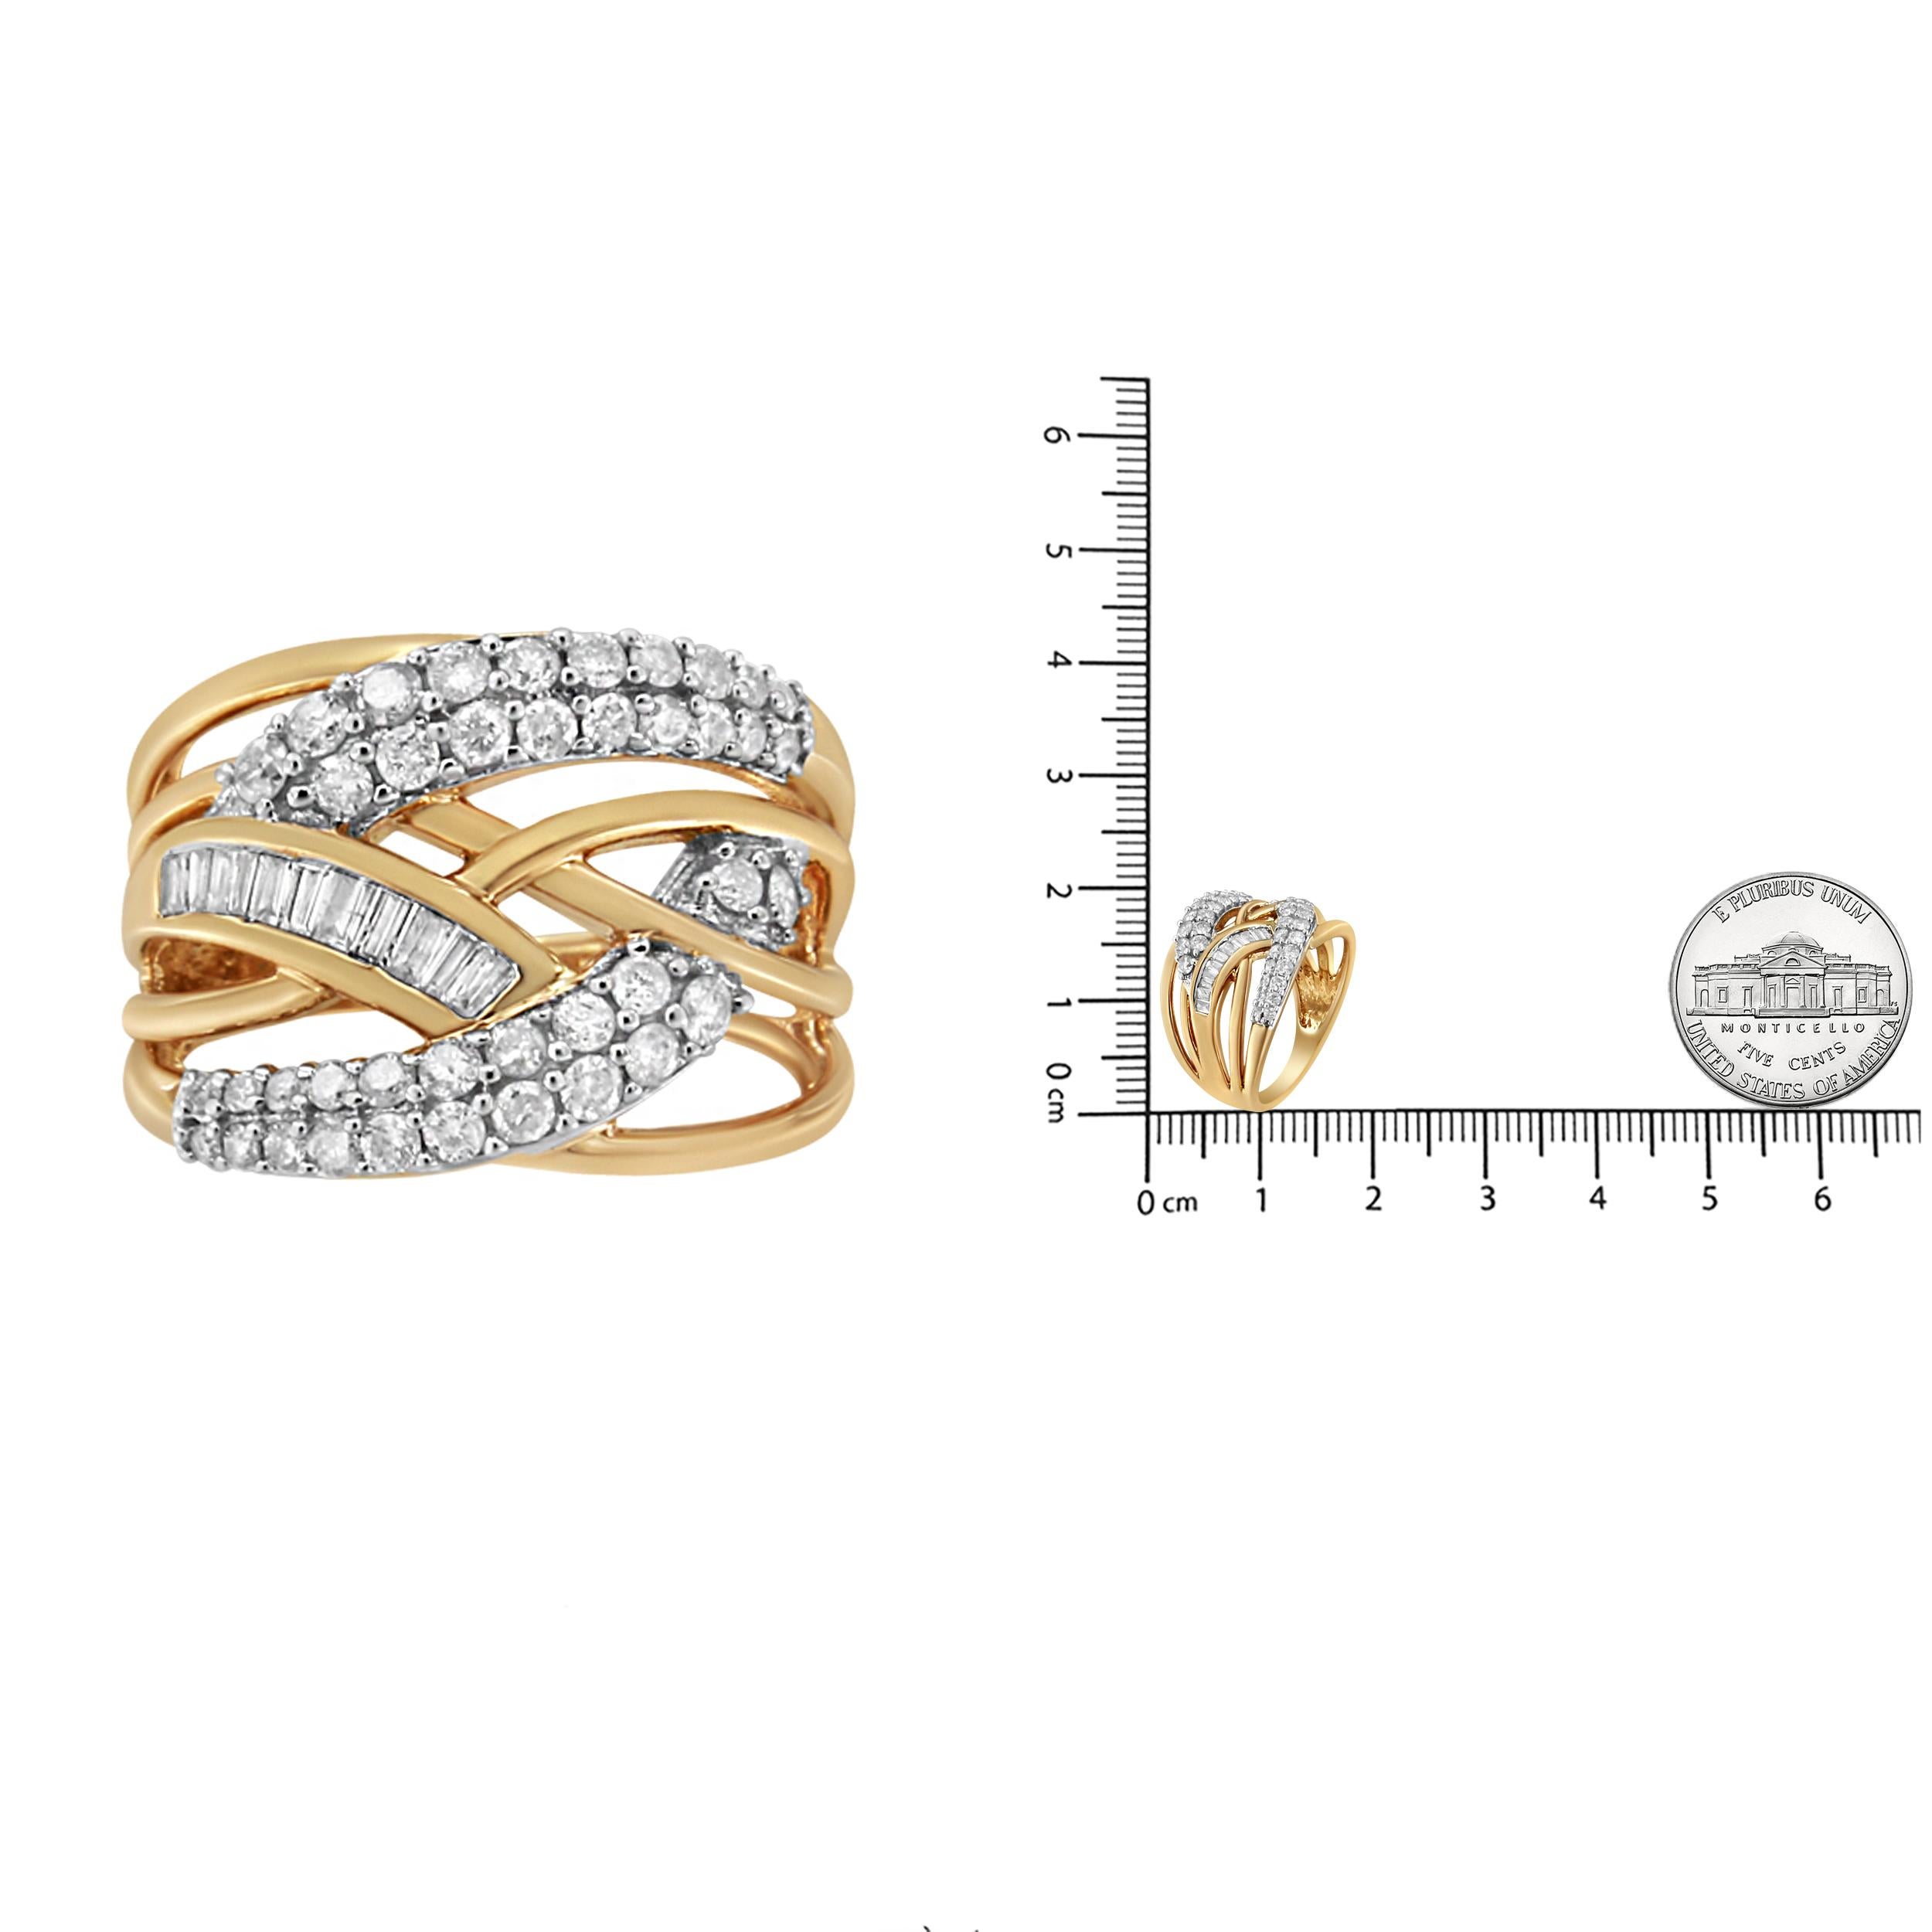 Intricately designed, this bold cocktail ring has a band woven together with sparkling 10k yellow gold to create an eye-catching cross bypass look. The yellow gold is embellished with natural round and baguette-cut diamonds. The stones are